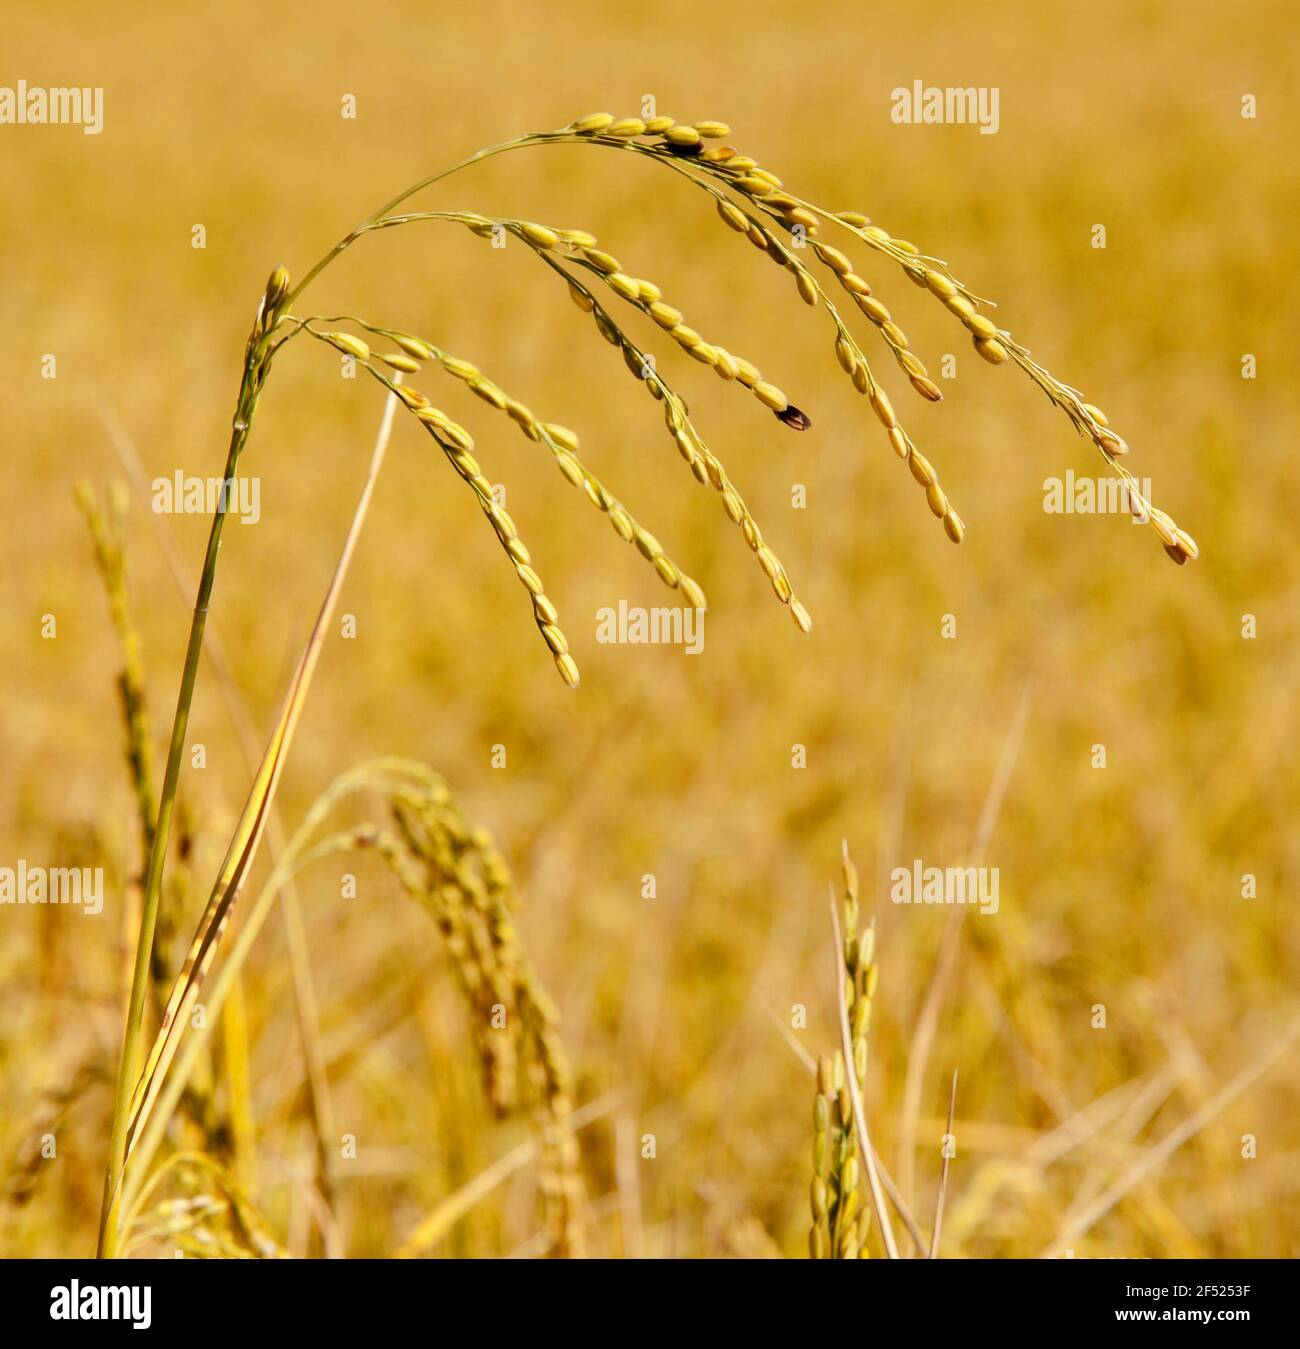 detail of Paddy and golden paddy field Stock Photo